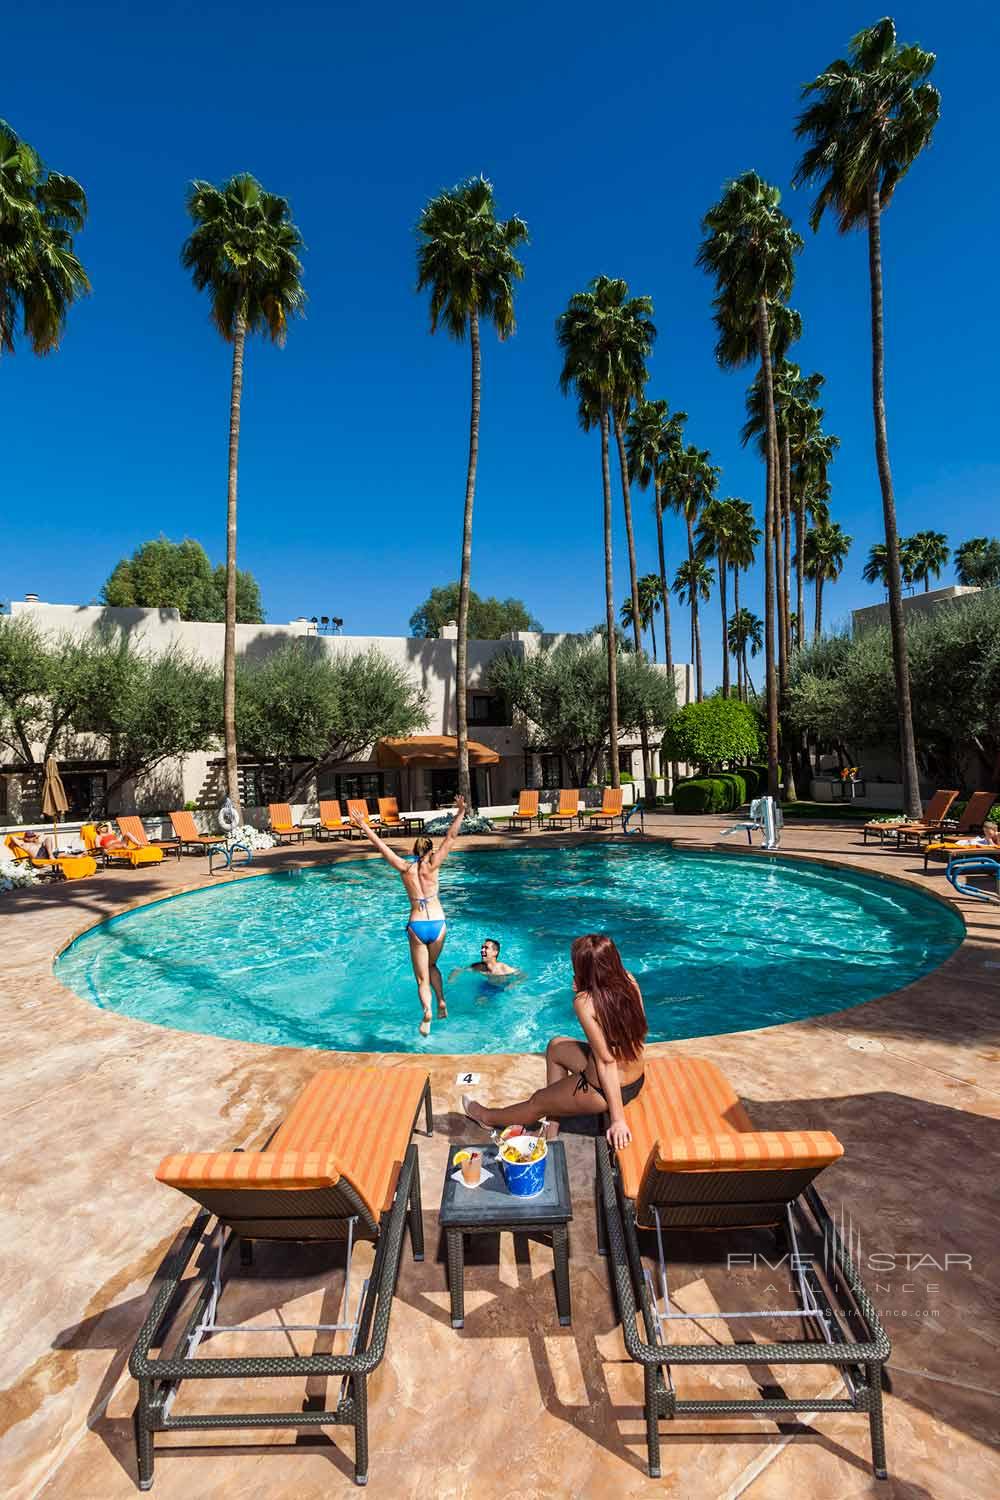 Casita Pool at Scottsdale Resort and Conference Center